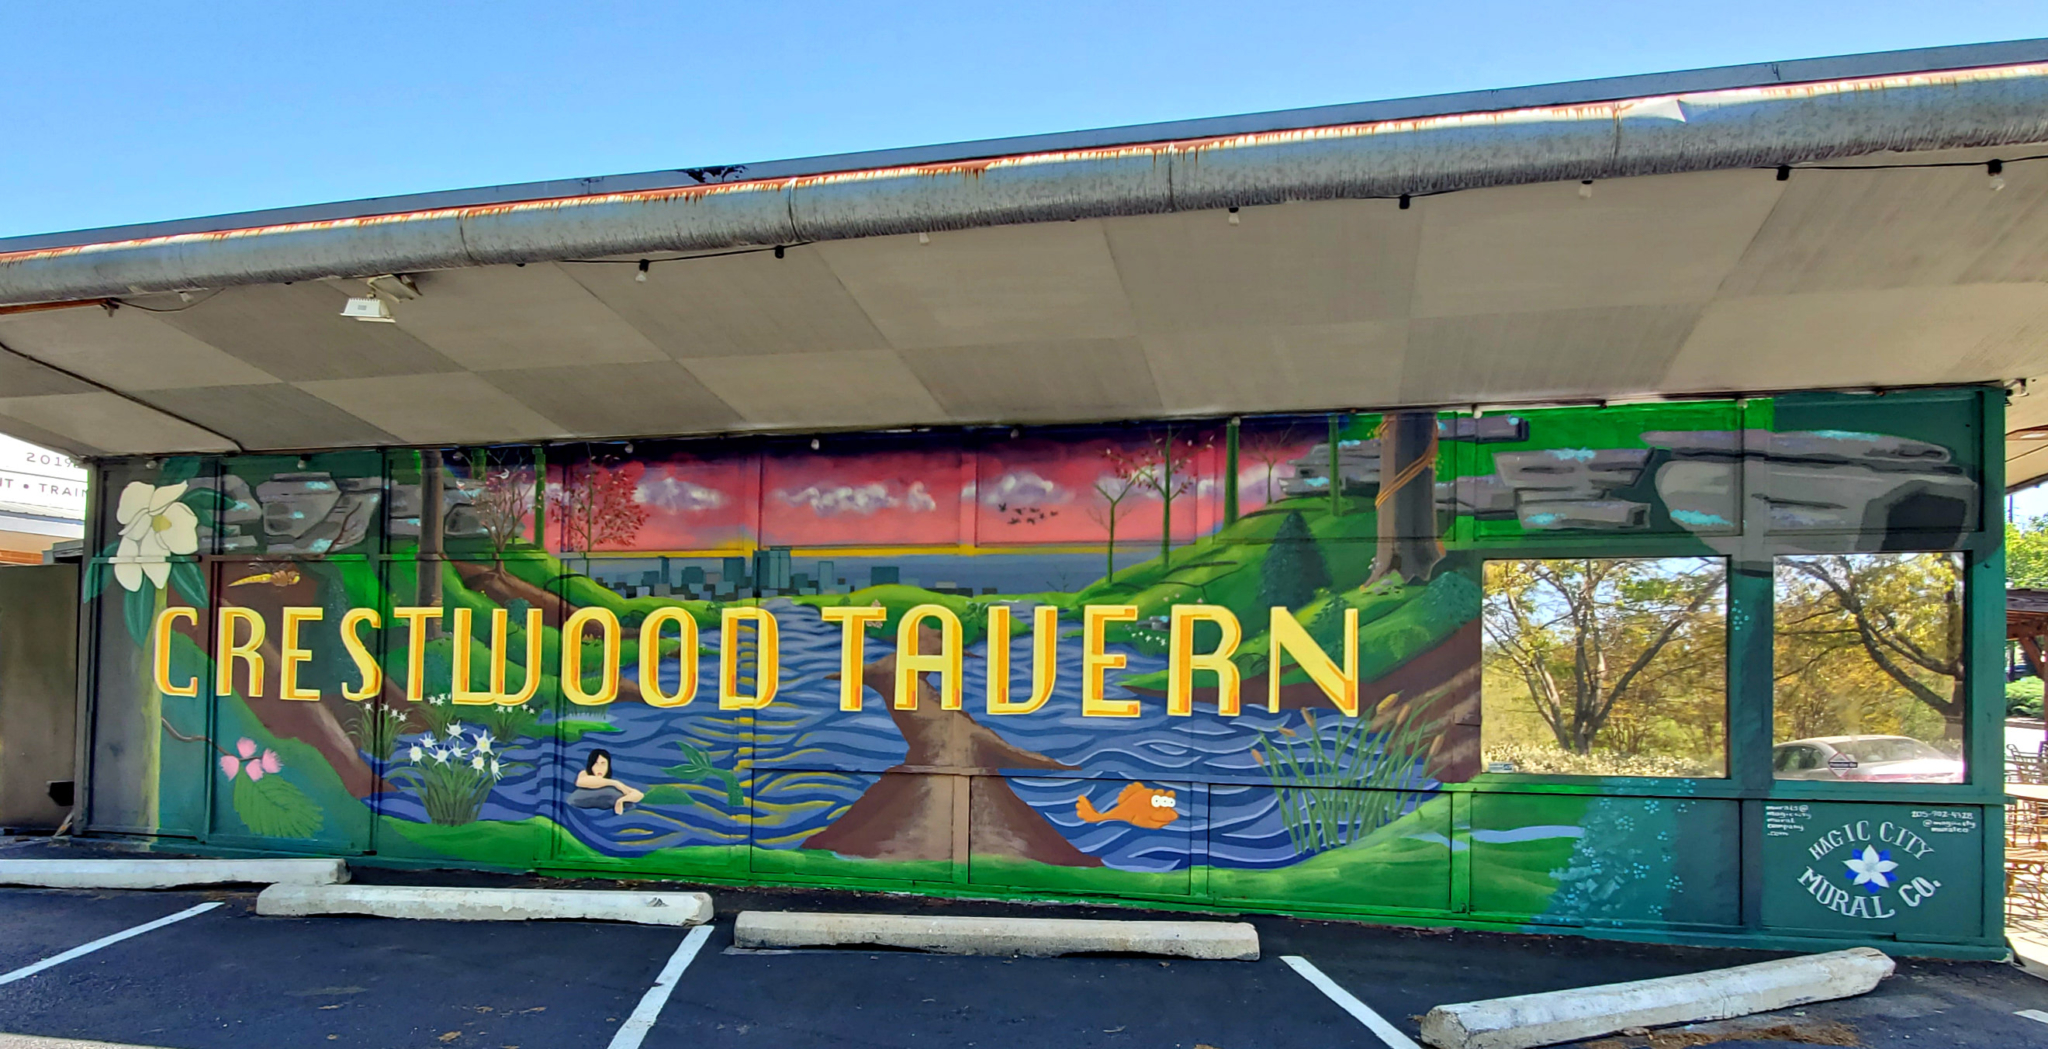 All the details on the Crestwood Tavern mural